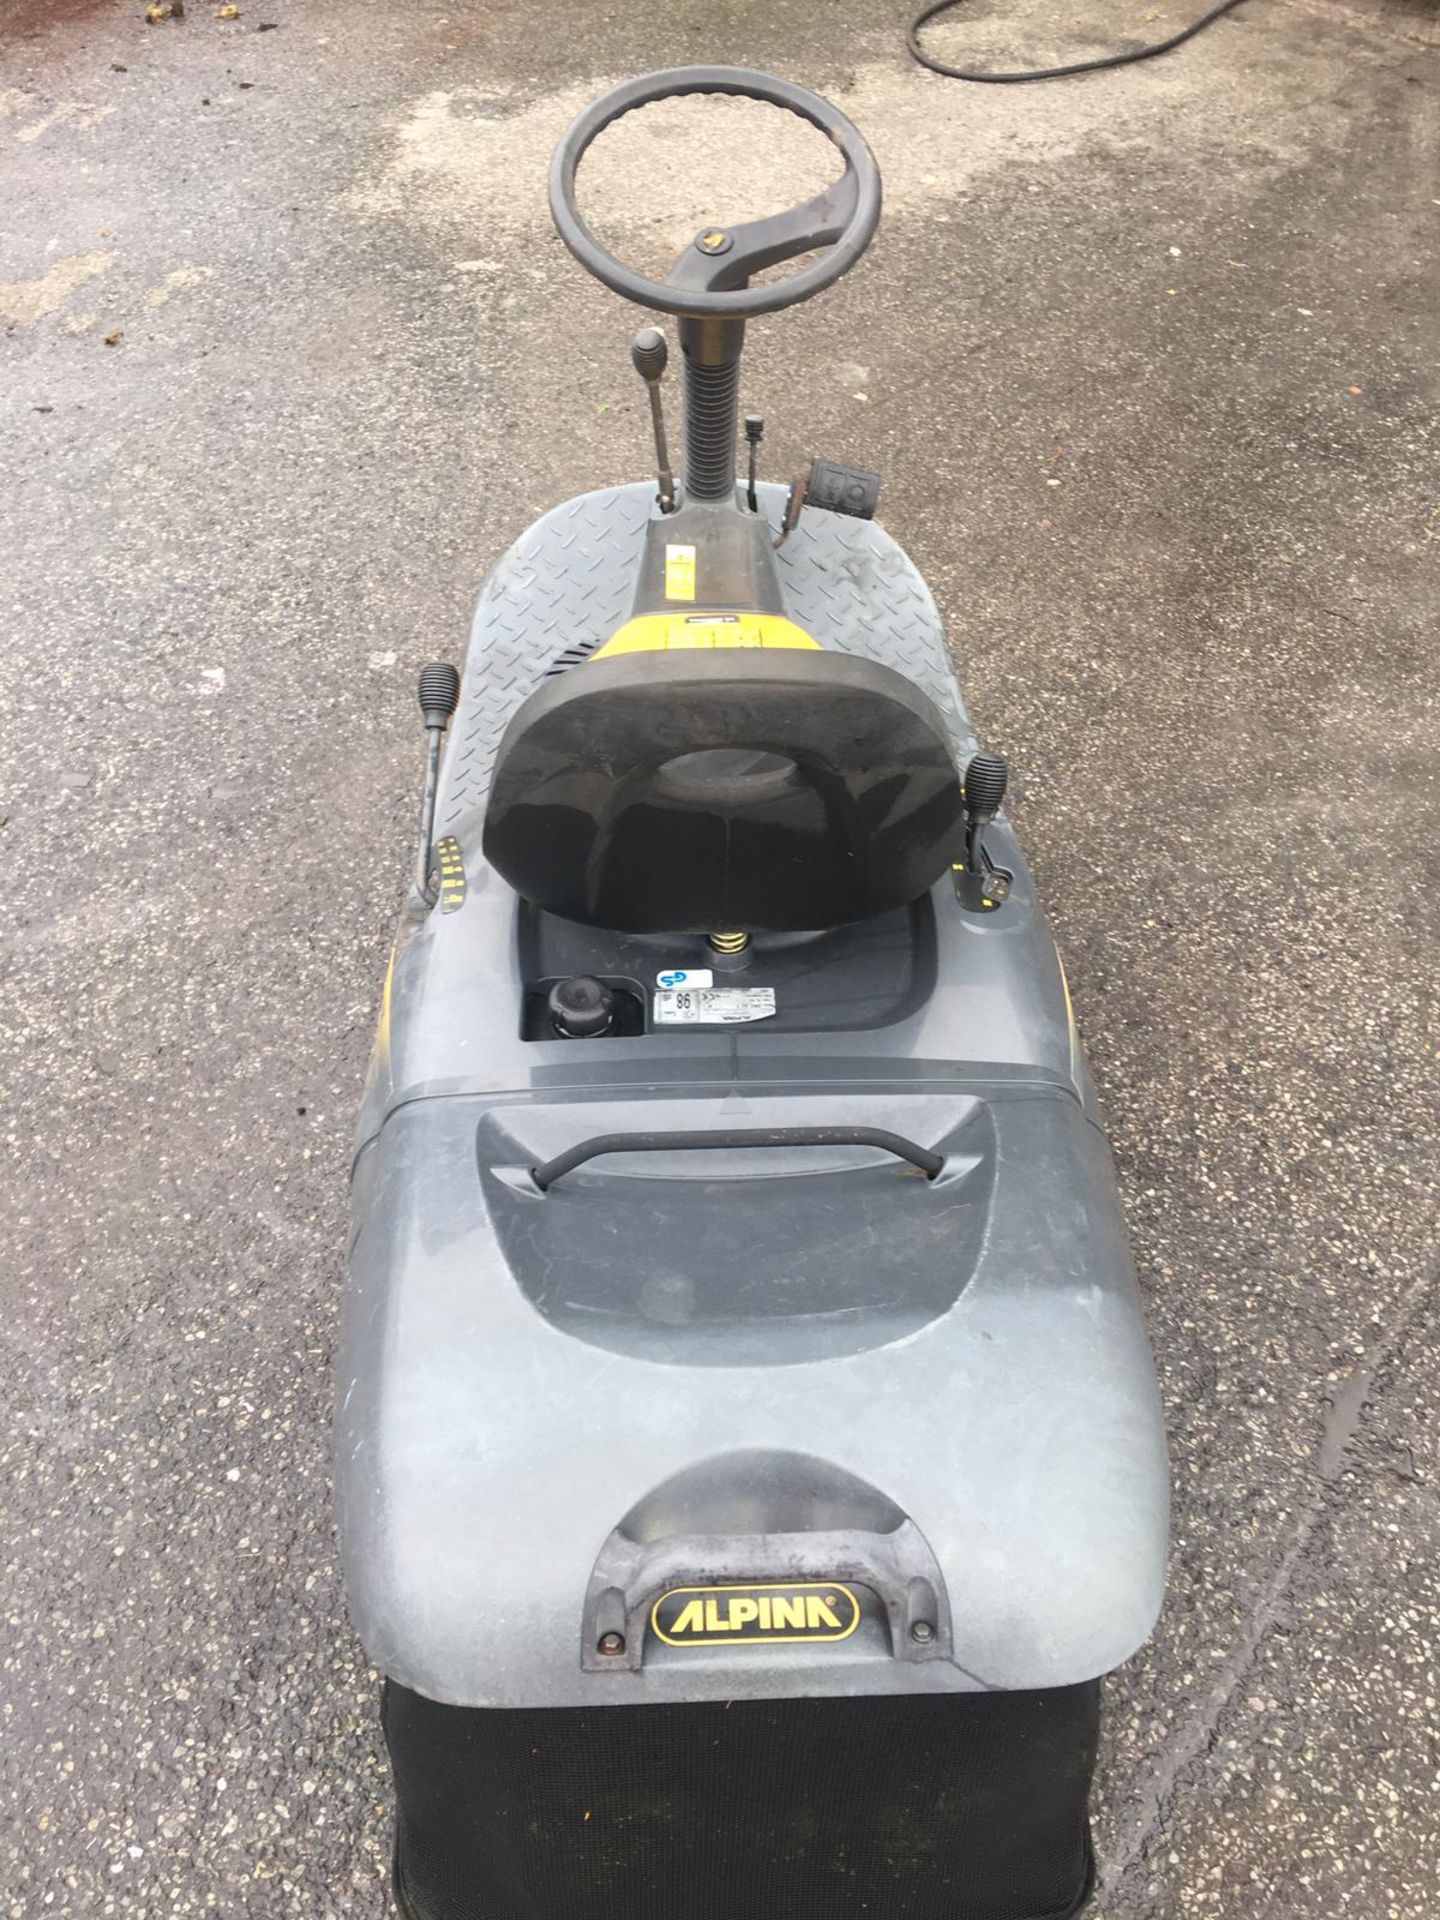 ALPINK ONE 63Y RIDE ON LAWN MOWER, ENGINE STARTS, BLADE RUNS BUT NO DRIVE *NO VAT* - Image 3 of 7